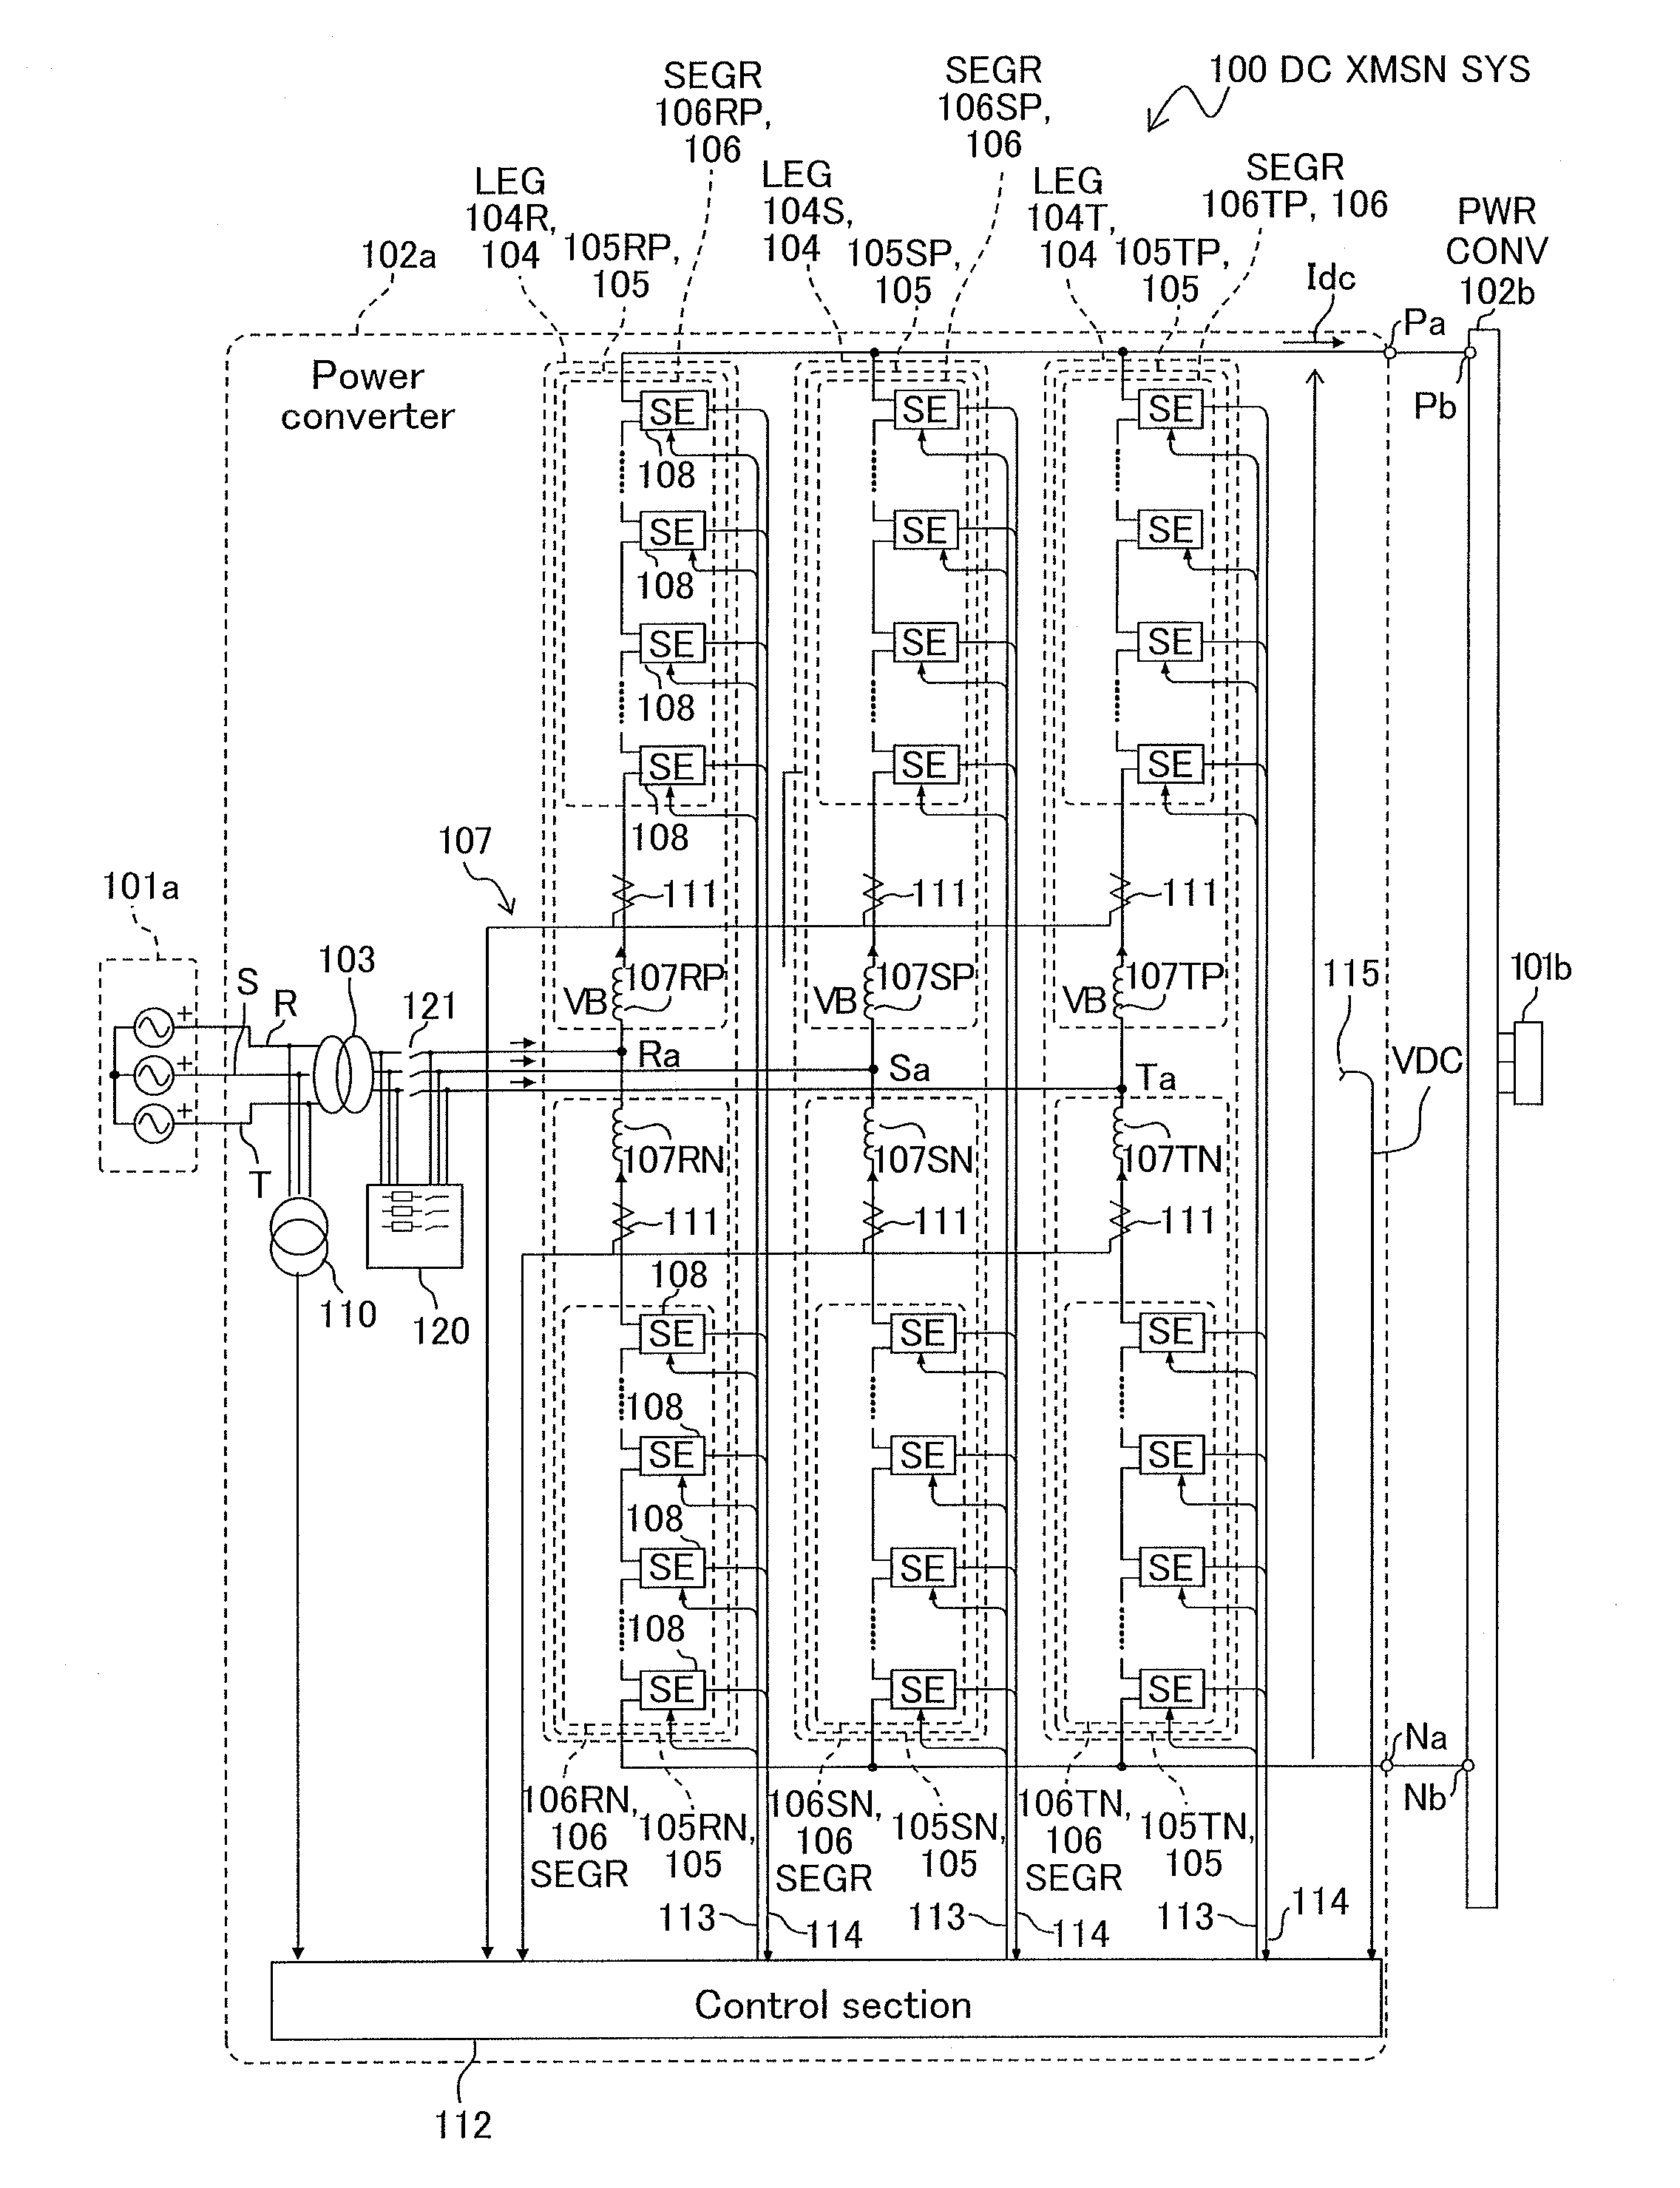 Switching Element, Power Converter, Direct Current Transmission System, Current Control Device, Method of Controlling Power Converter, and Method of Controlling Current in Voltage Source Converter